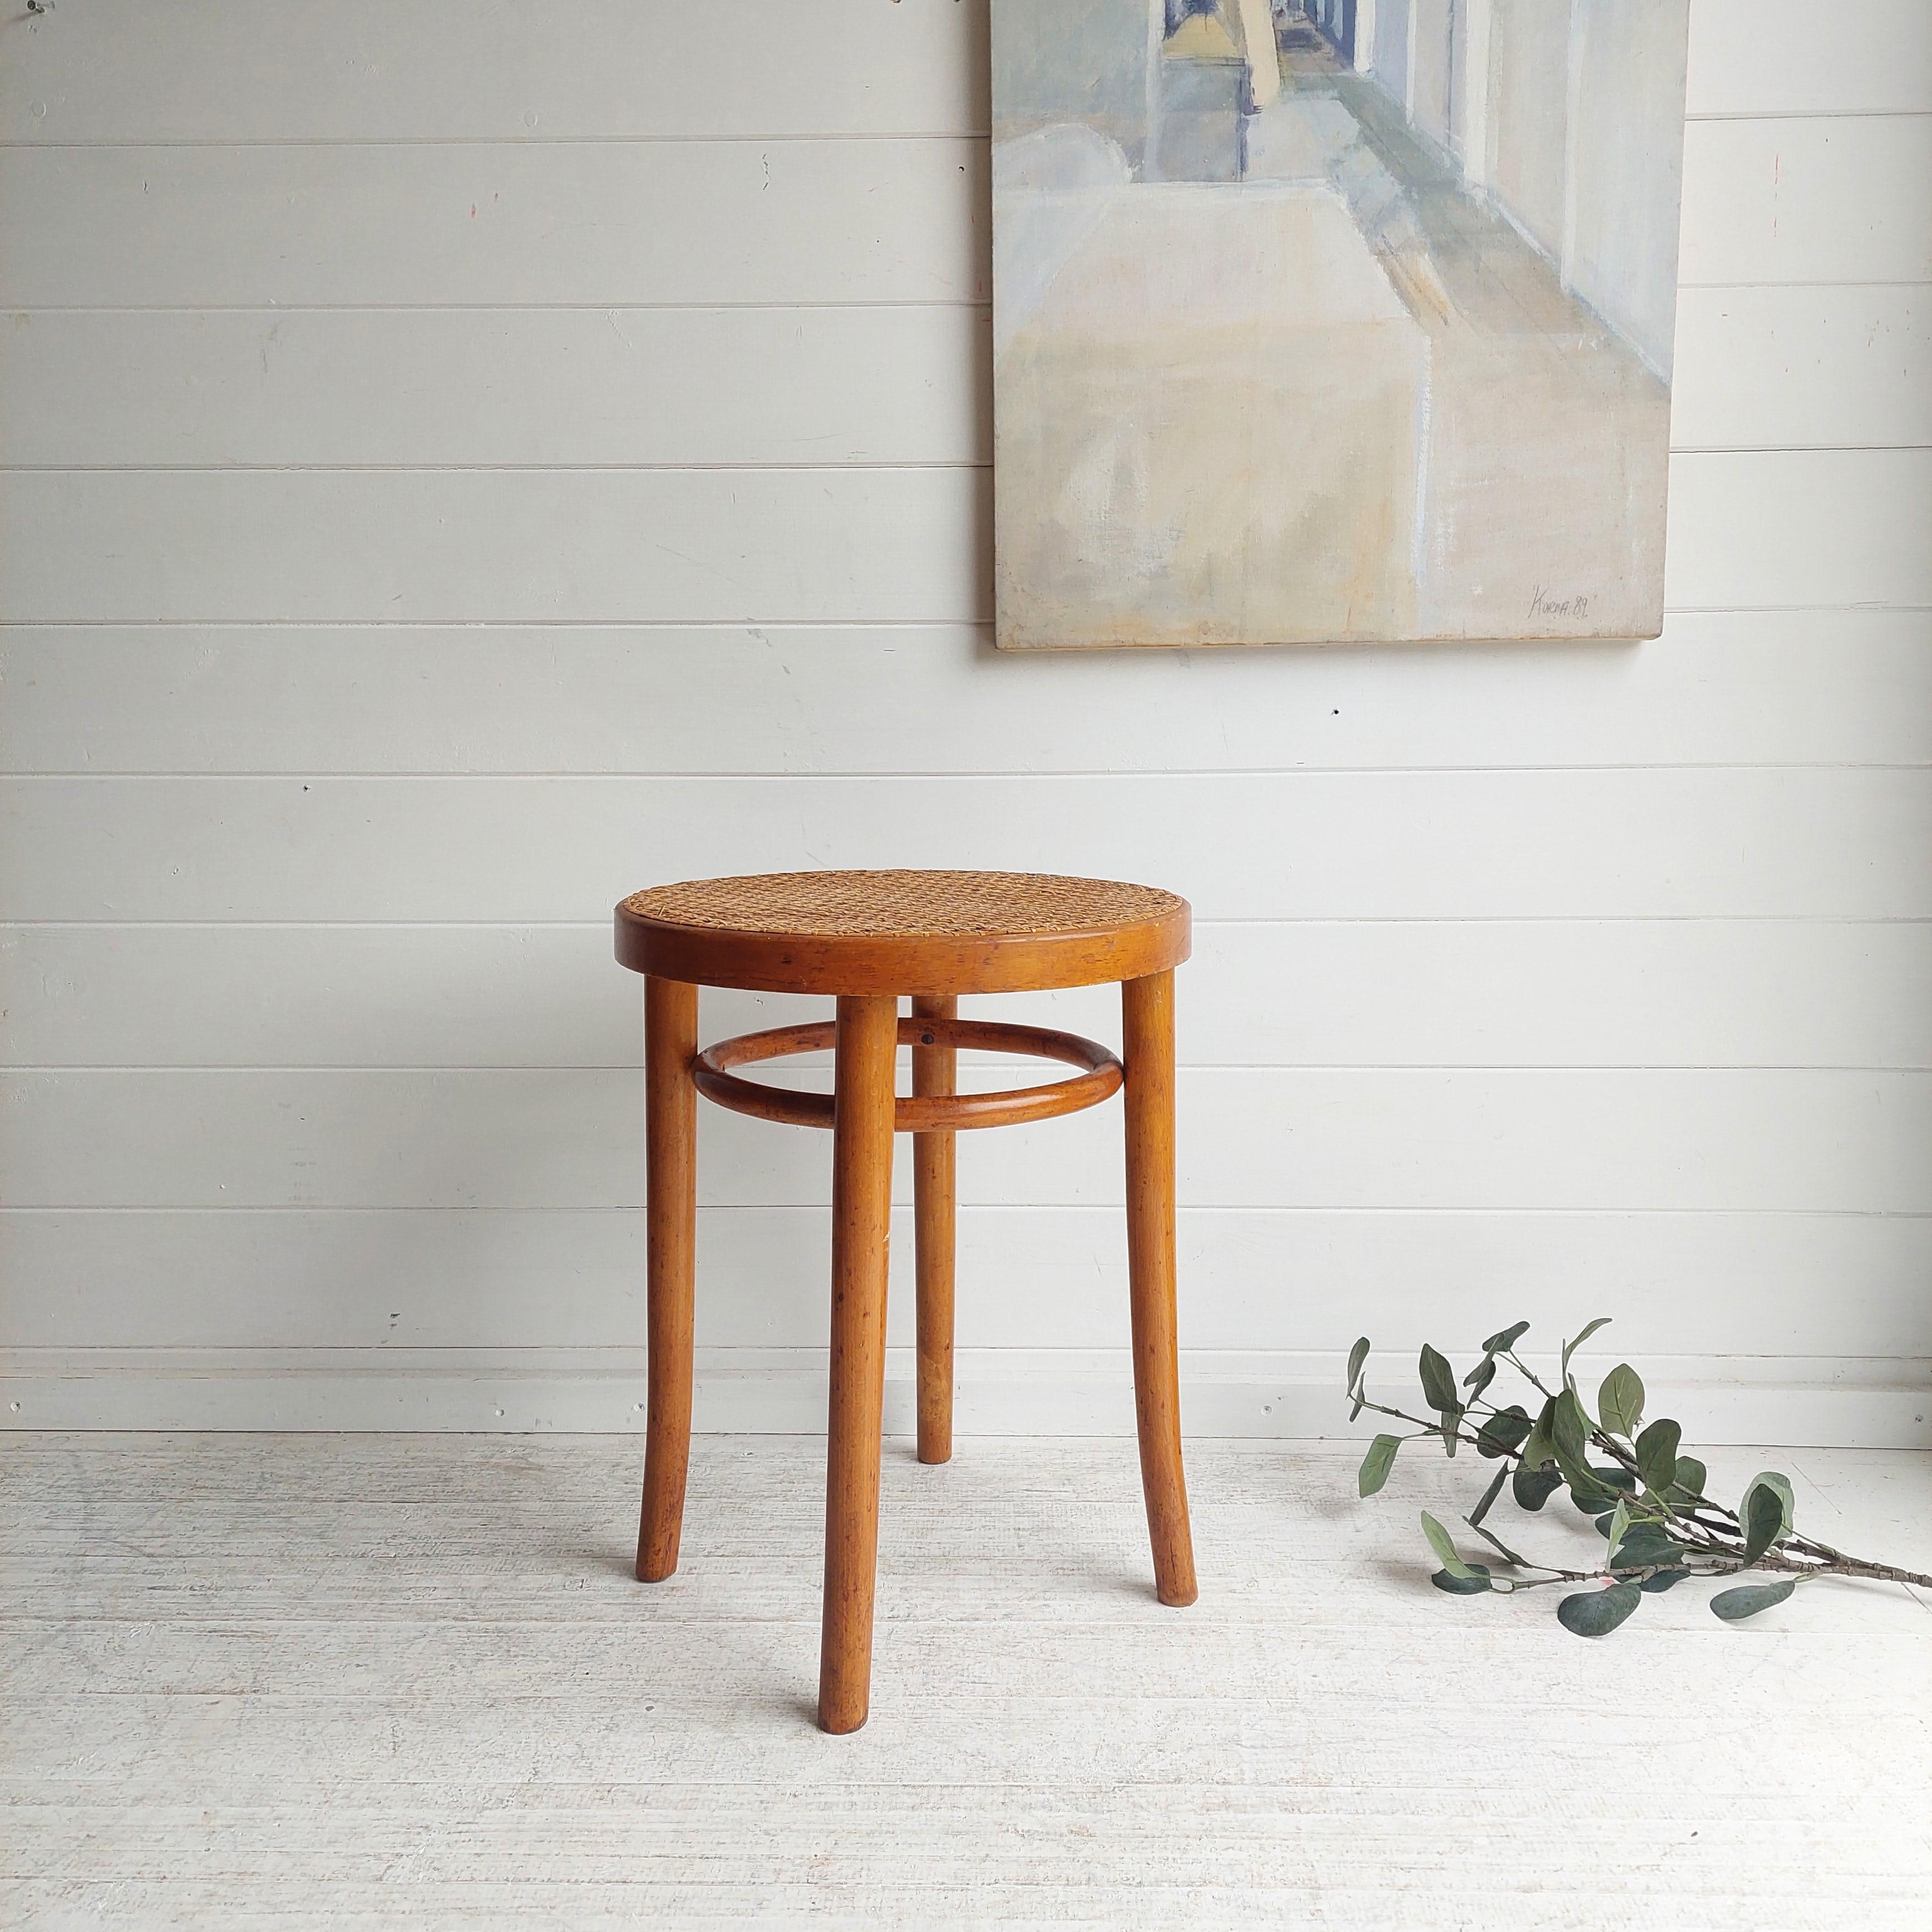 Thonet bentwood stool , model 4601. 1960s Wicker .
This is probably produced in the the late 30s early 40s.
A bentwood stool possibly produced by Thonet. 

A classic bentwood stool with cane seat,  probably handmade in Poland. 
Beech frame and legs